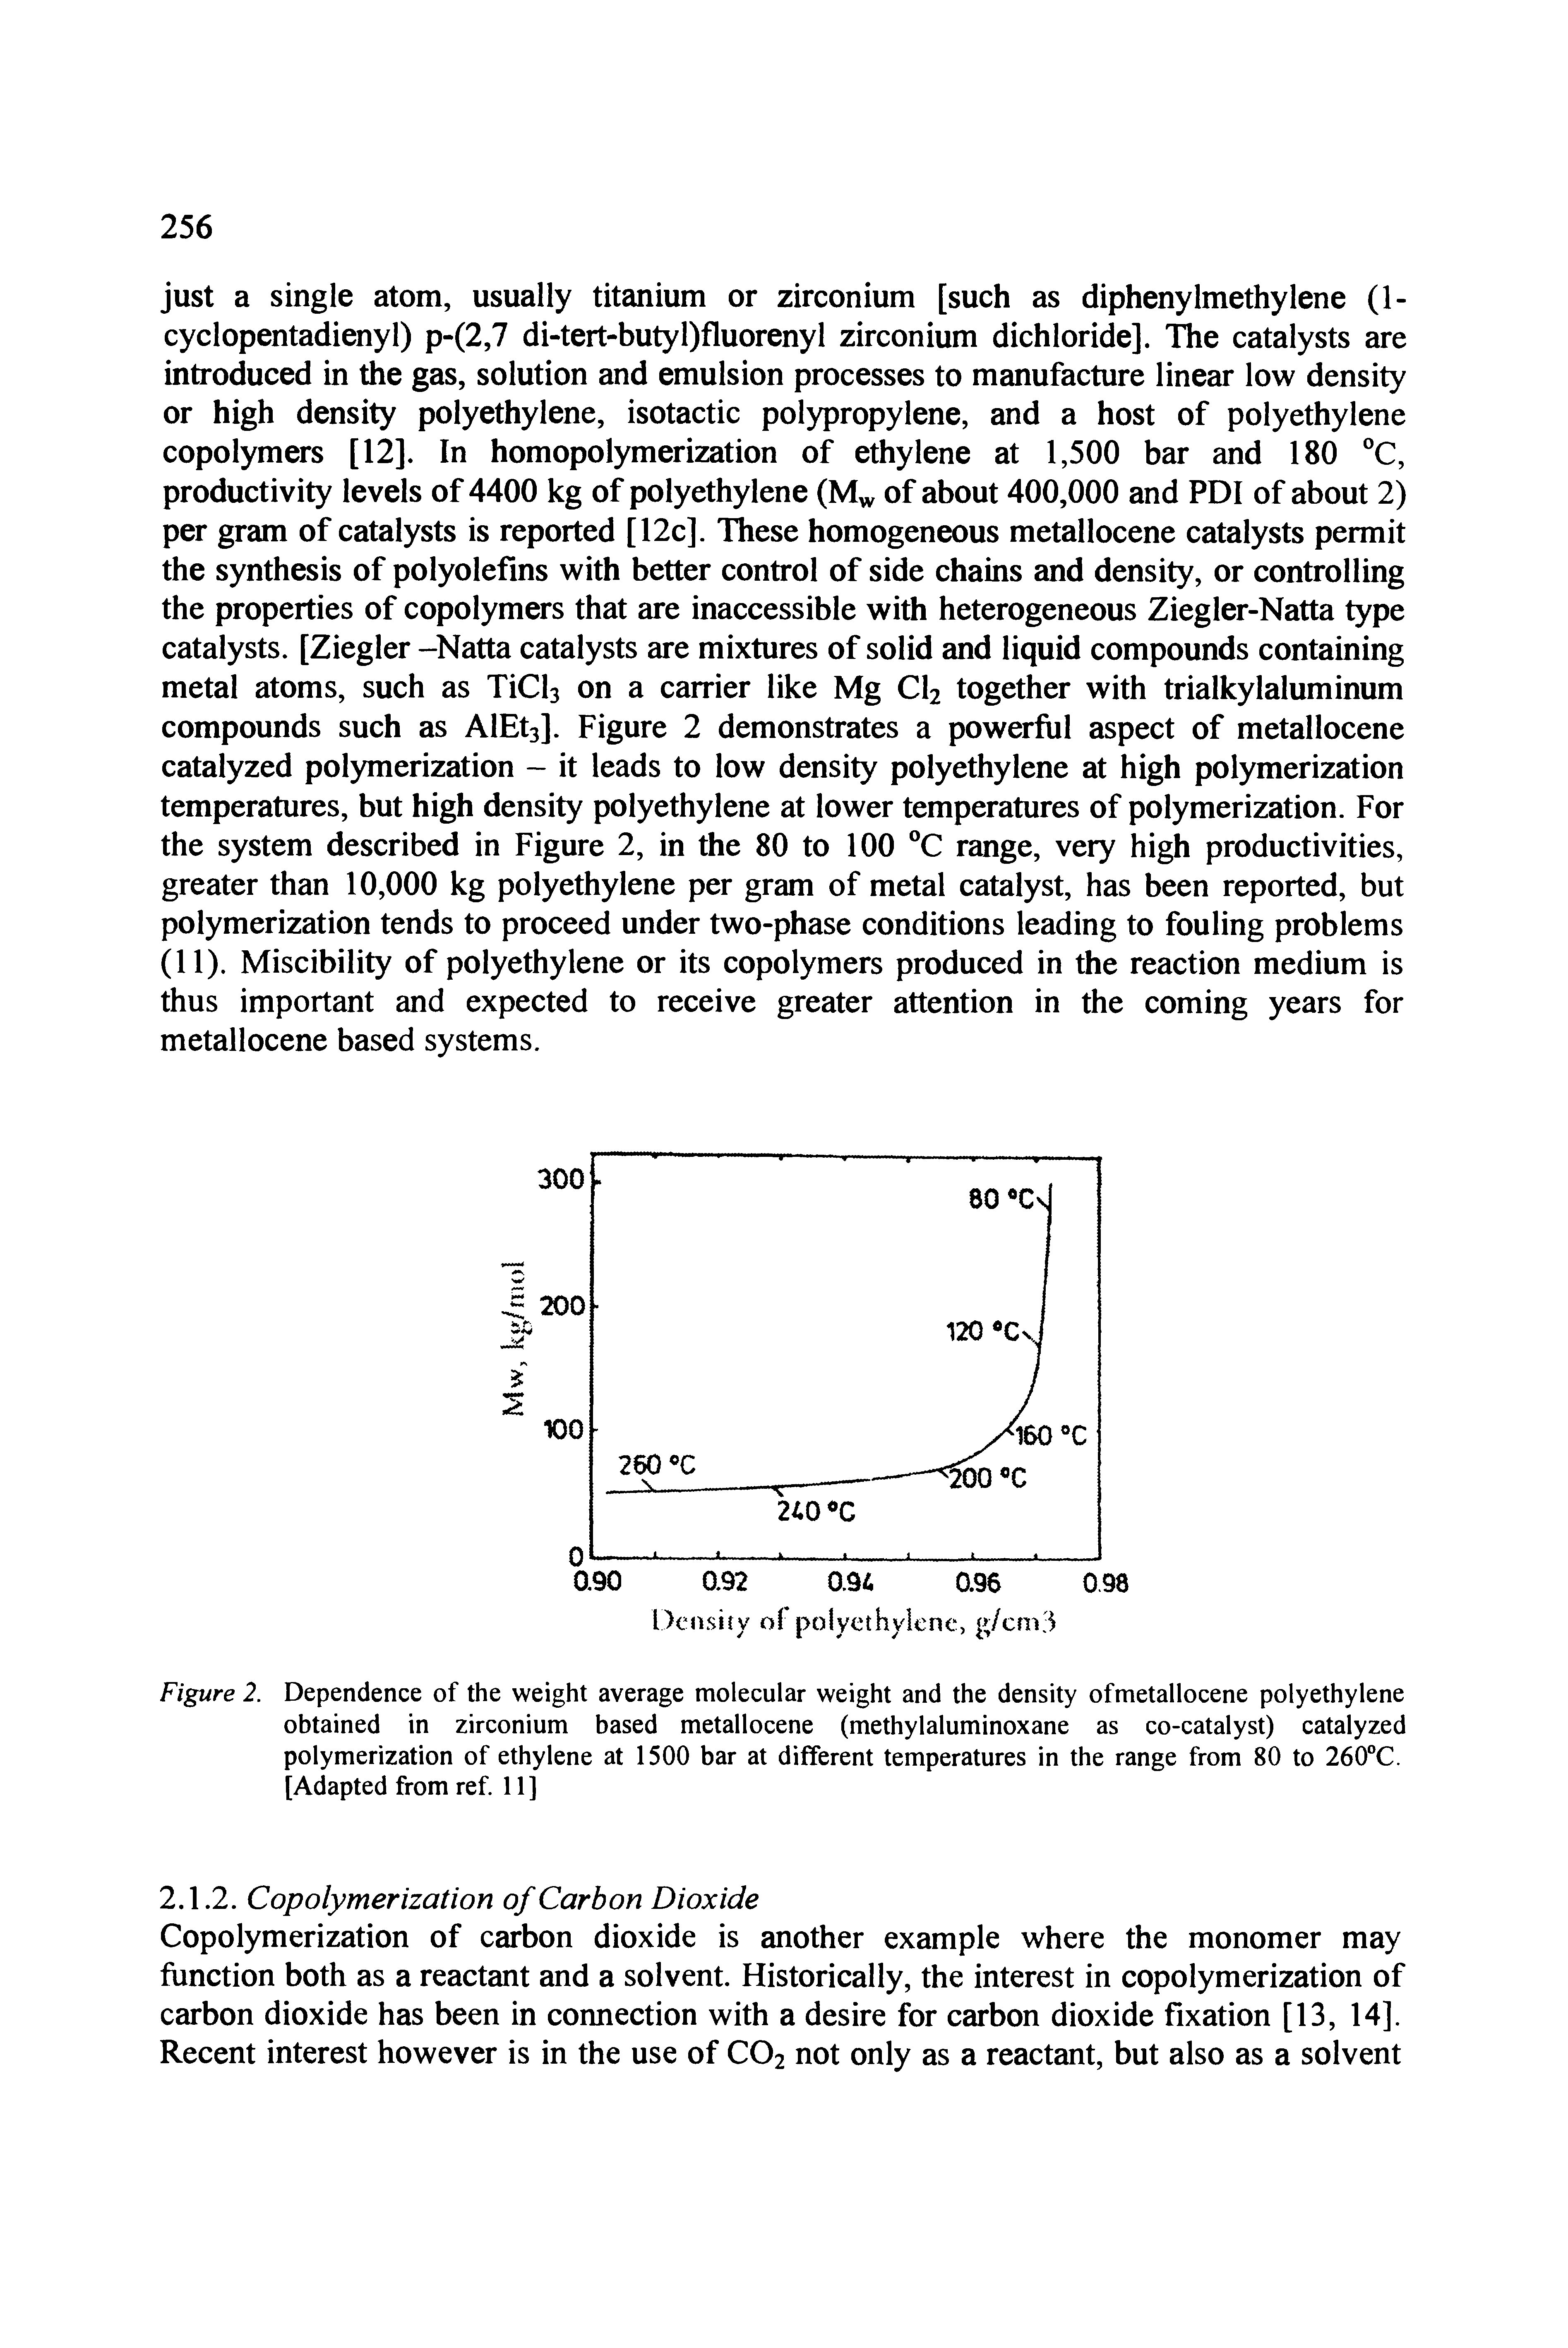 Figure 2. Dependence of the weight average molecular weight and the density ofmetallocene polyethylene obtained in zirconium based metallocene (methylaluminoxane as co-catalyst) catalyzed polymerization of ethylene at 1500 bar at different temperatures in the range from 80 to 260°C. [Adapted from ref. 11]...